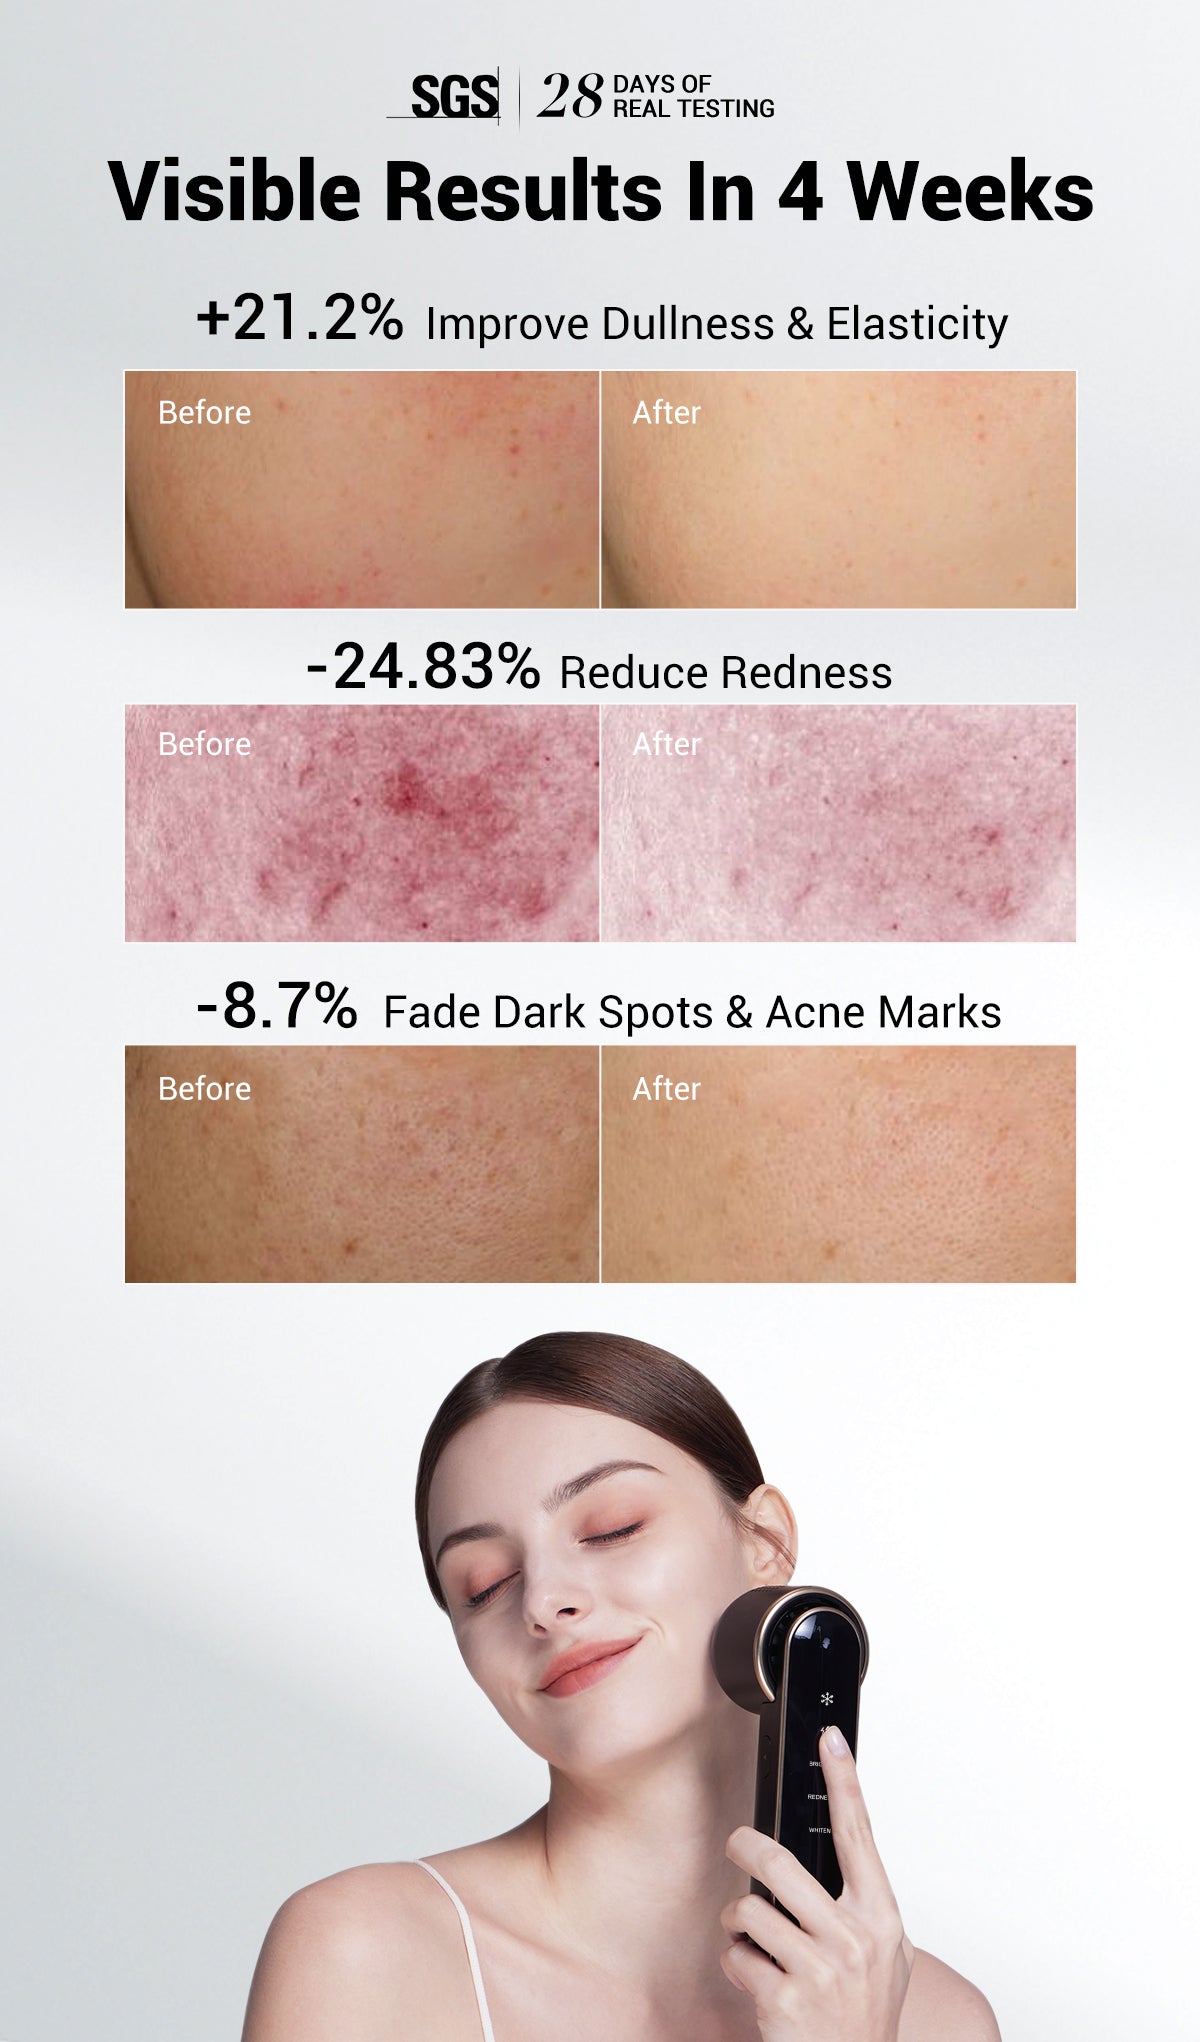 JOVS Blacken Photofacial Device showing visible results in 4 weeks, reducing redness and dark spots while improving skin's dullness and elasticity.